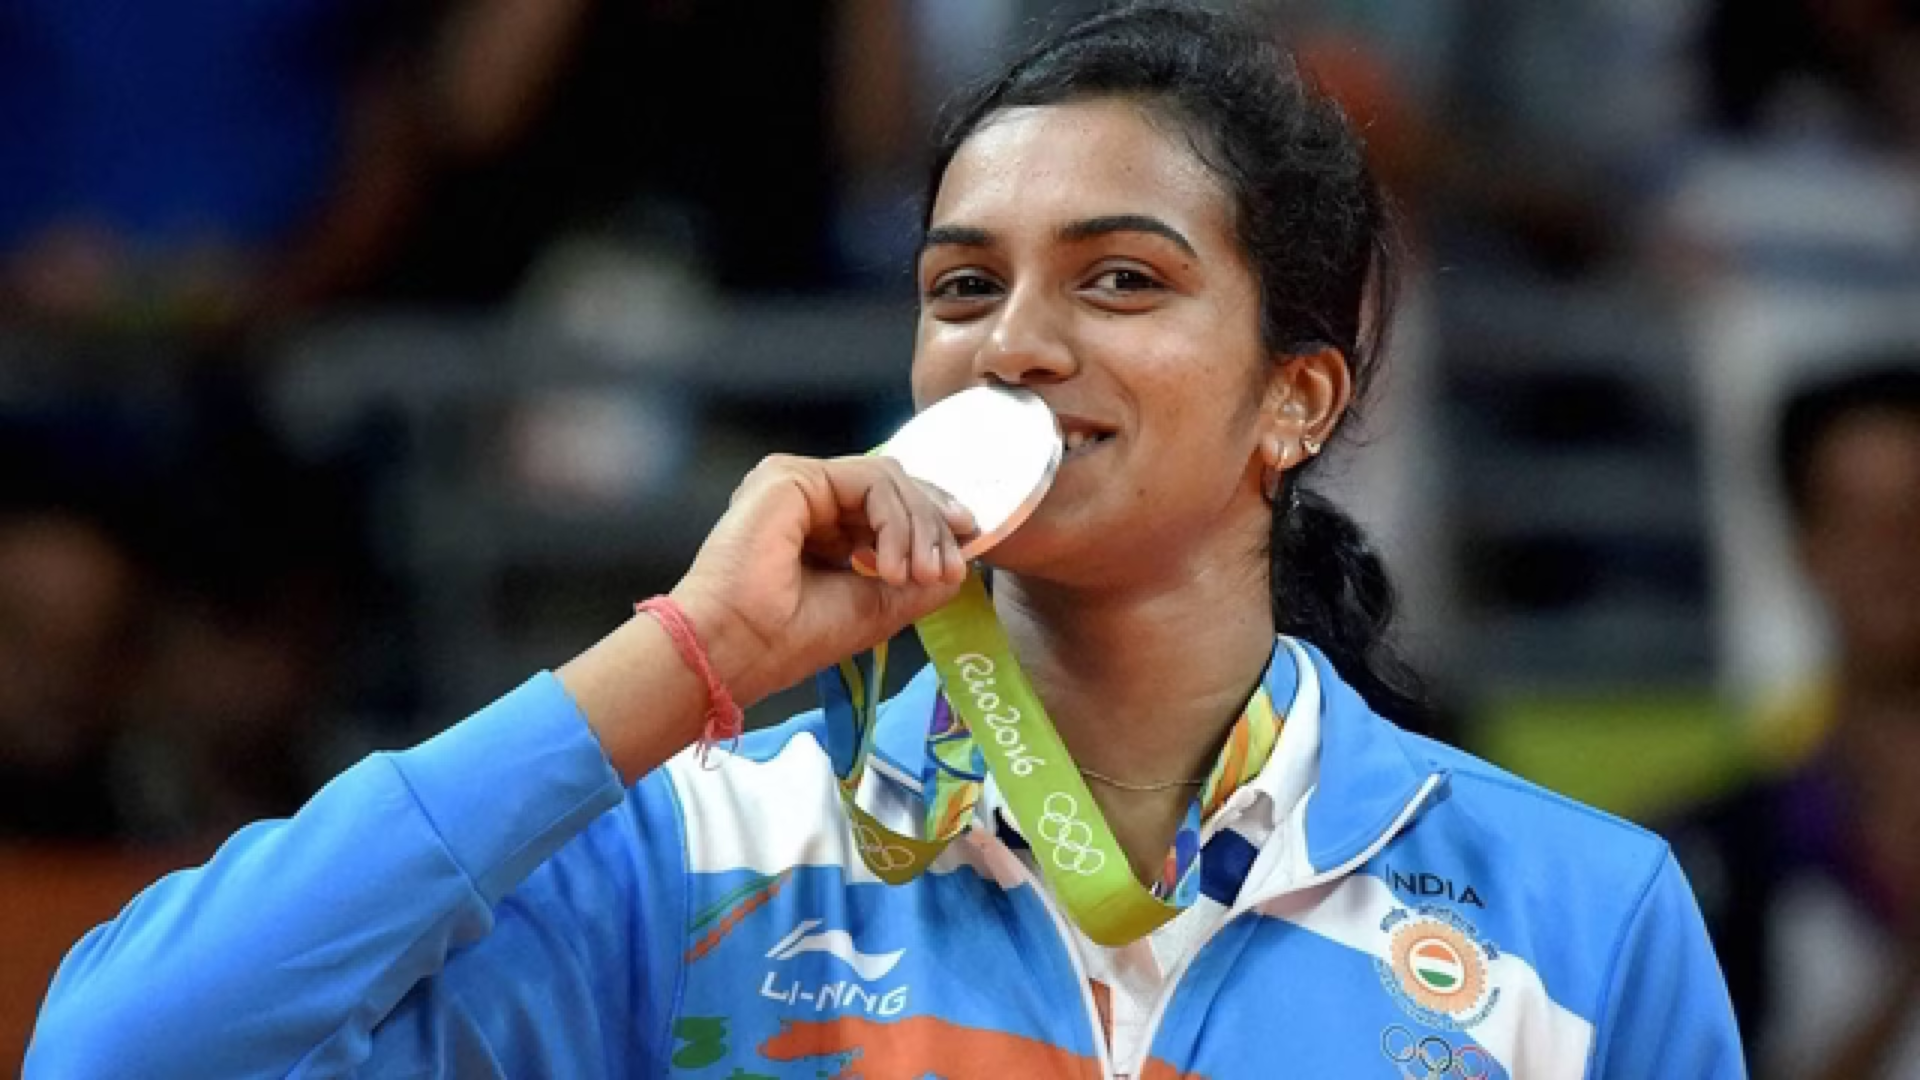 Historic Moment: PV Sindhu And Sharath Kamal Lead India’s Charge At Paris Olympics